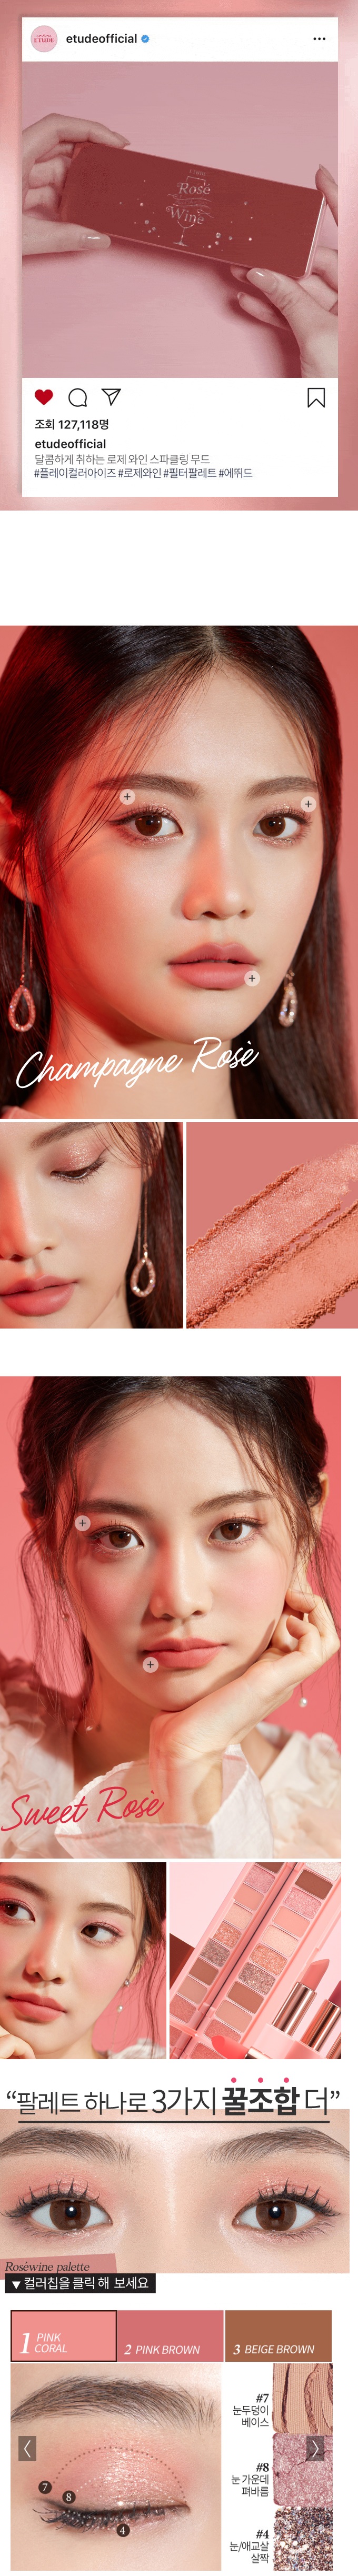 Etude House Play Color Eyes Rose Wine Eye Palette korean cosmetic makeup product online shop malaysia macau thailand2